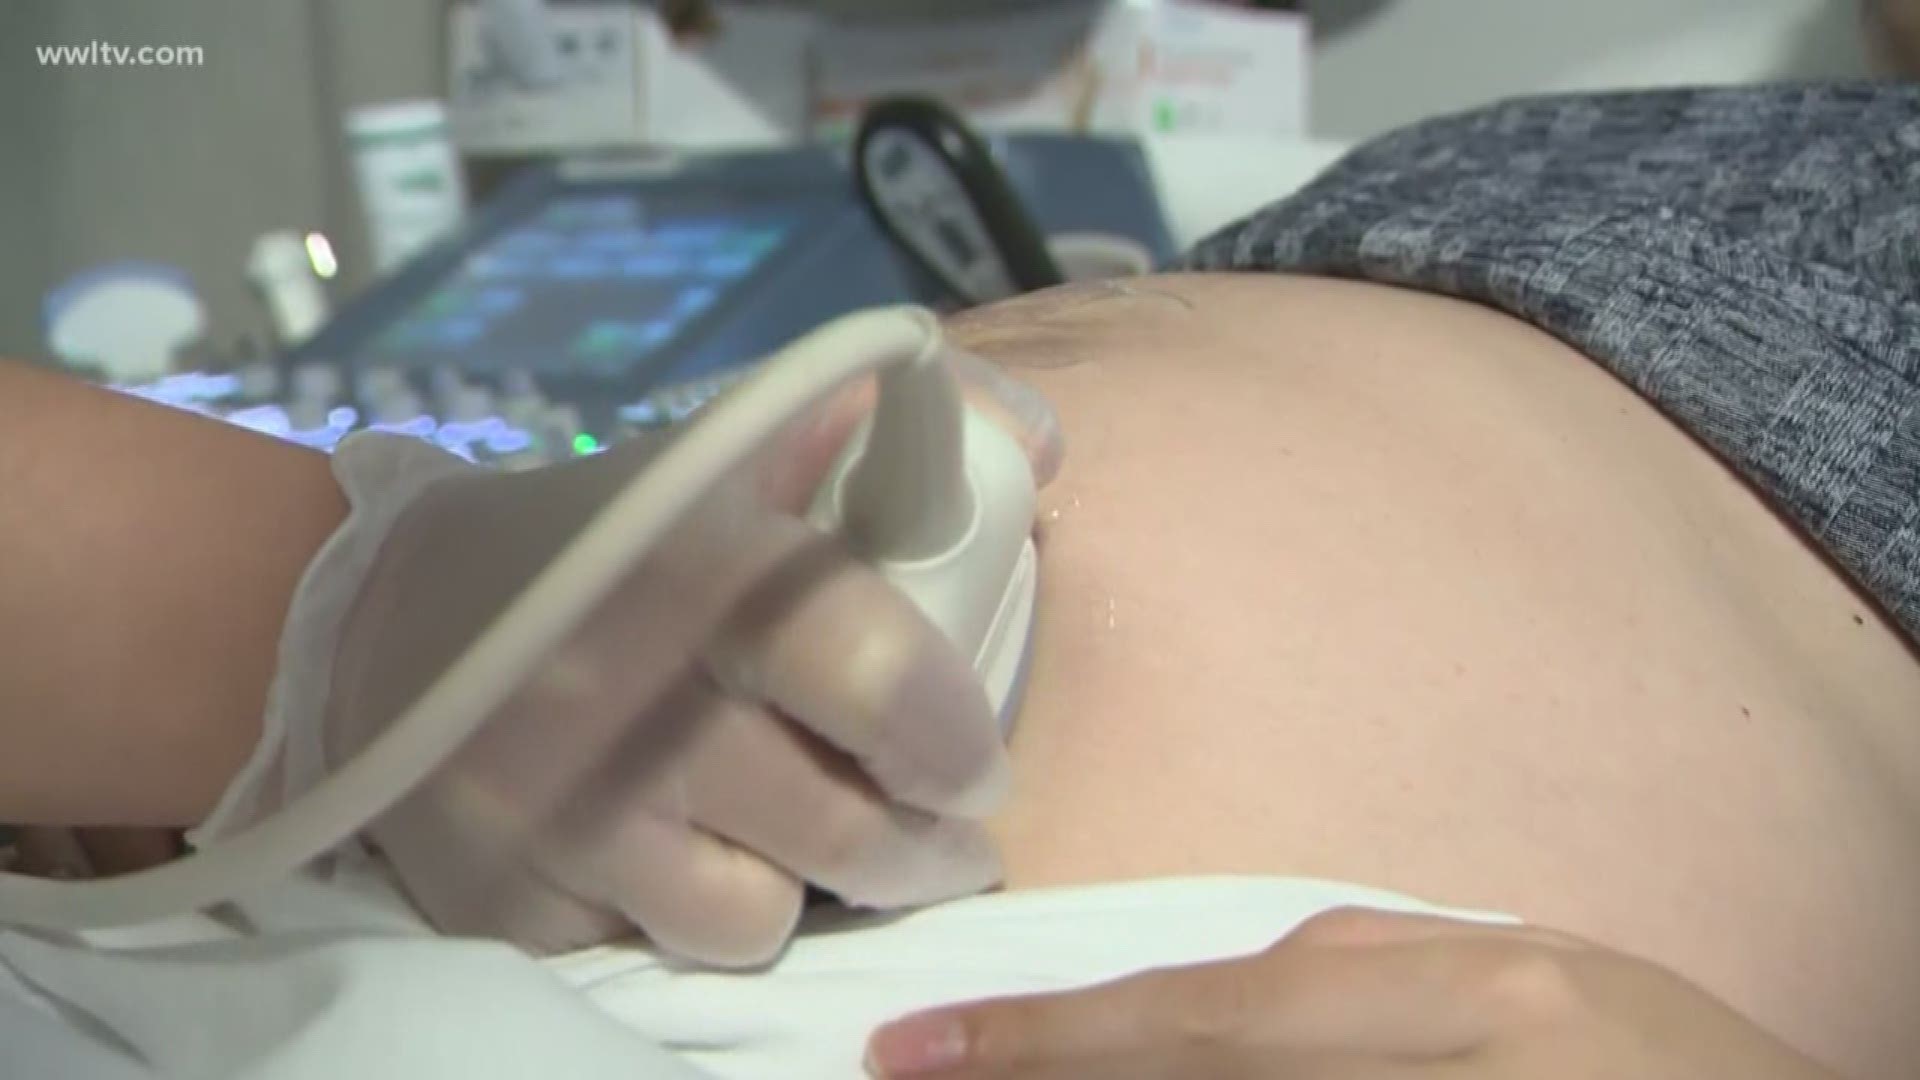 Experts who study the drug say this is a dangerous health trend for the next generation and explain why pregnant women, breast feeding women and teens are most at risk.